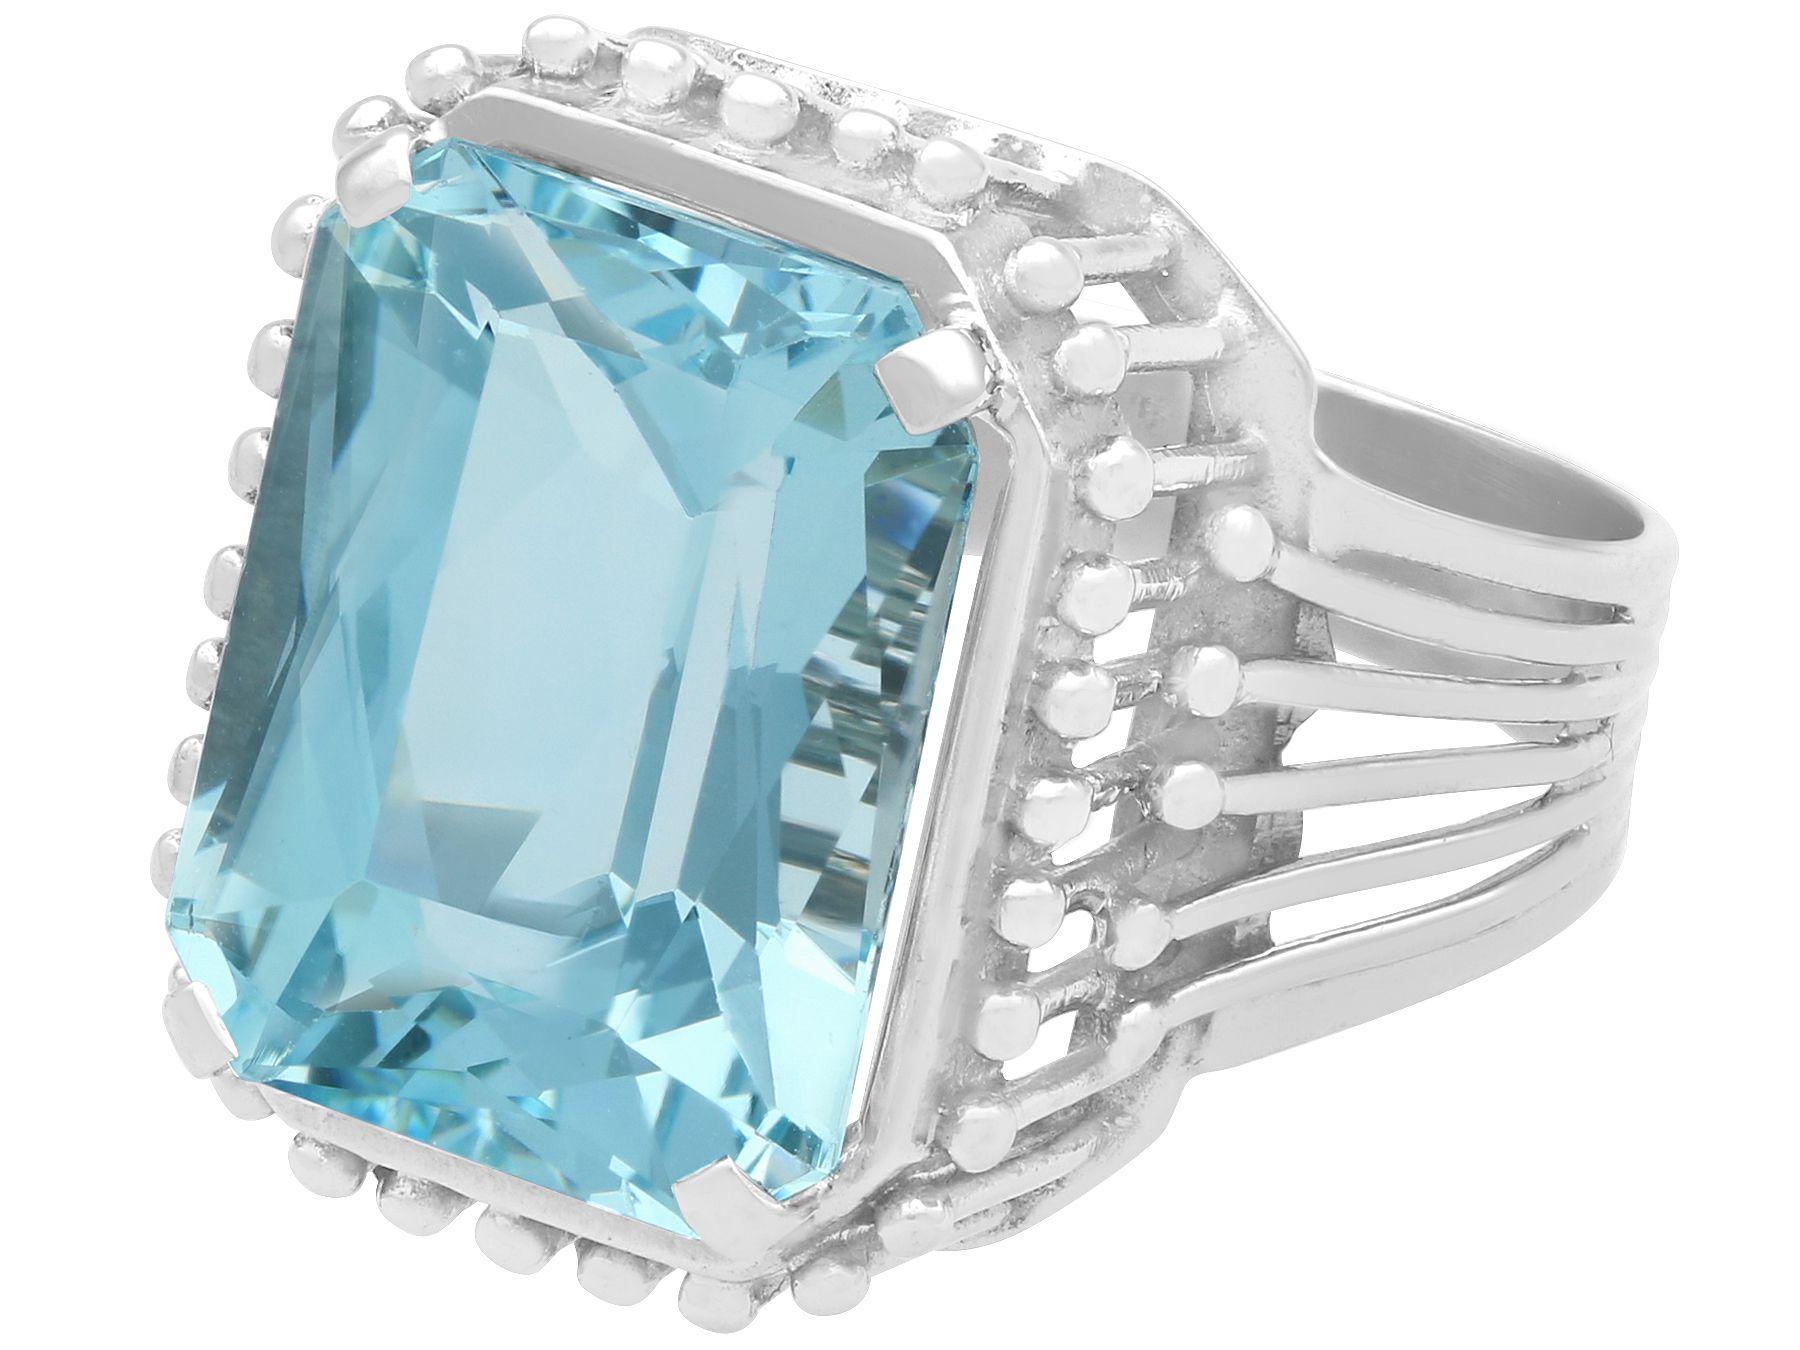 Vintage 11.81 carat Emerald Cut Aquamarine and Platinum Cocktail Ring In Excellent Condition For Sale In Jesmond, Newcastle Upon Tyne